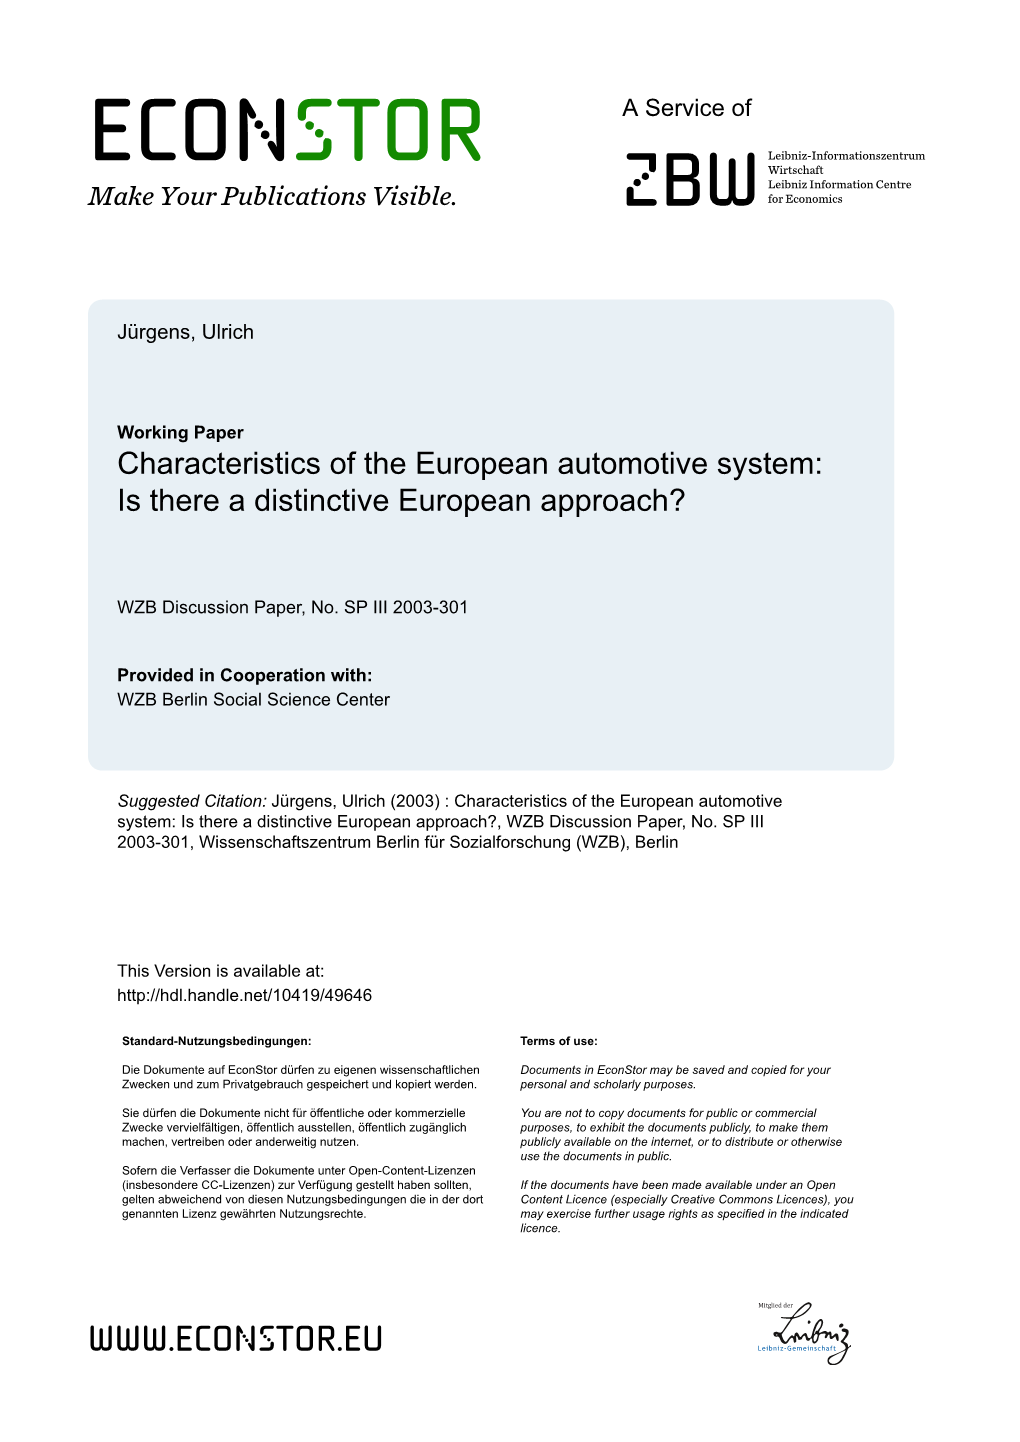 Characteristics of the European Automotive System: Is There a Distinctive European Approach?